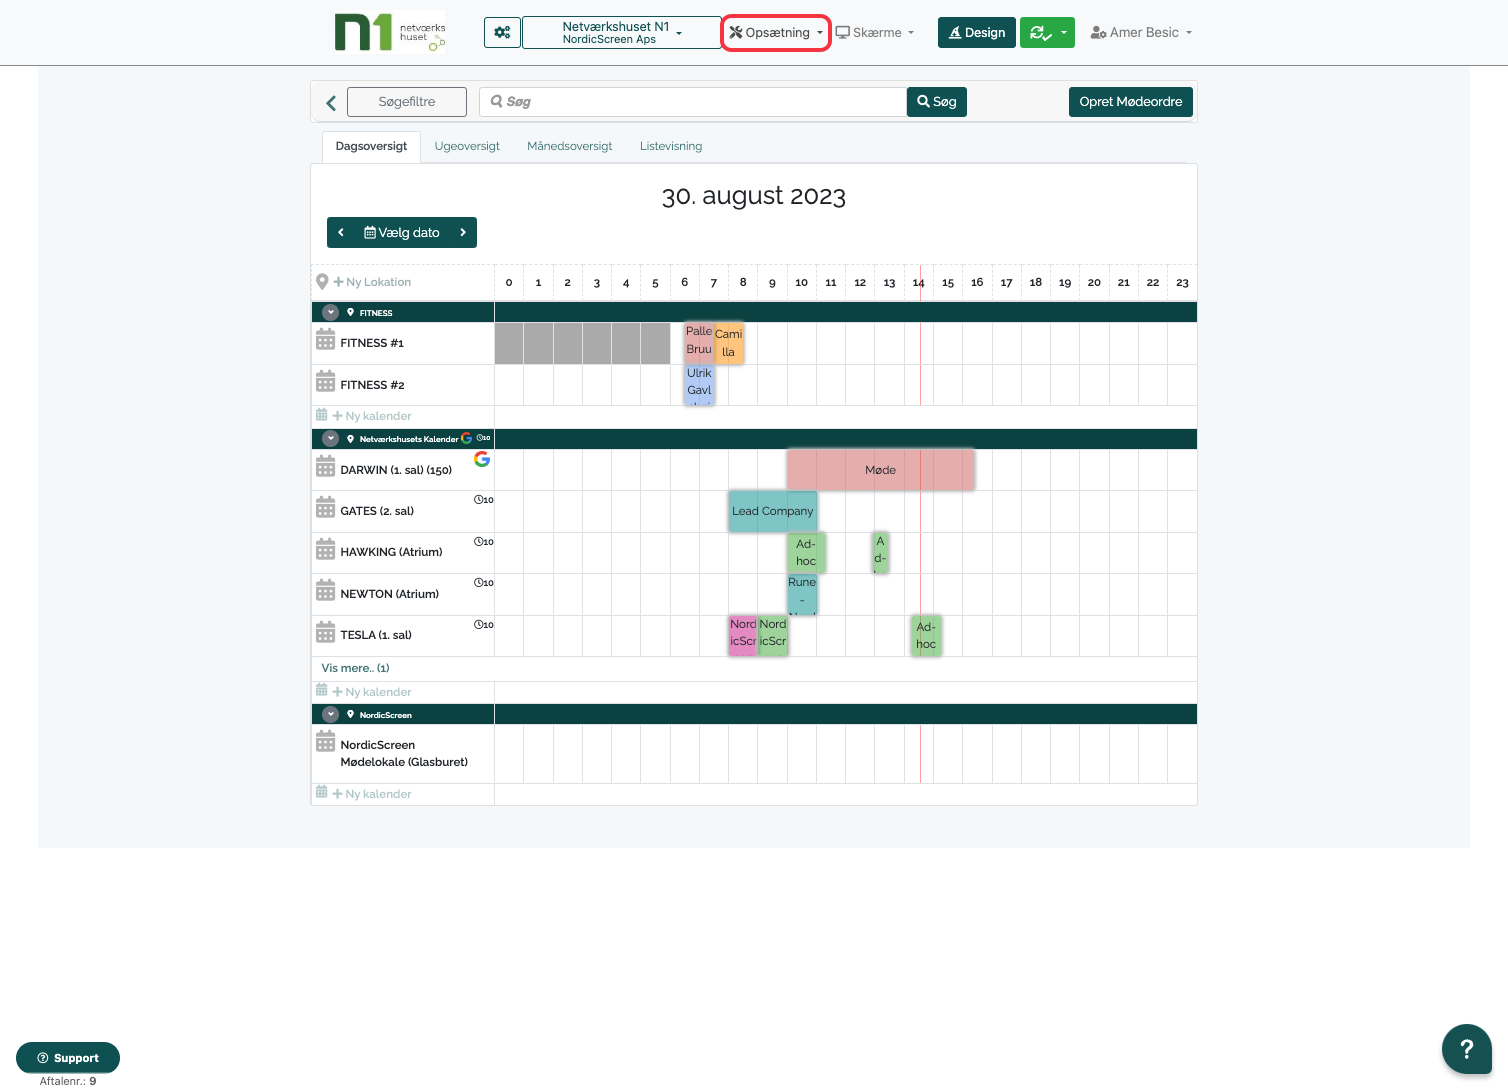 Calendar schedule interface showing bookings for various rooms and locations on August 30, 2023, with options for different views and settings.